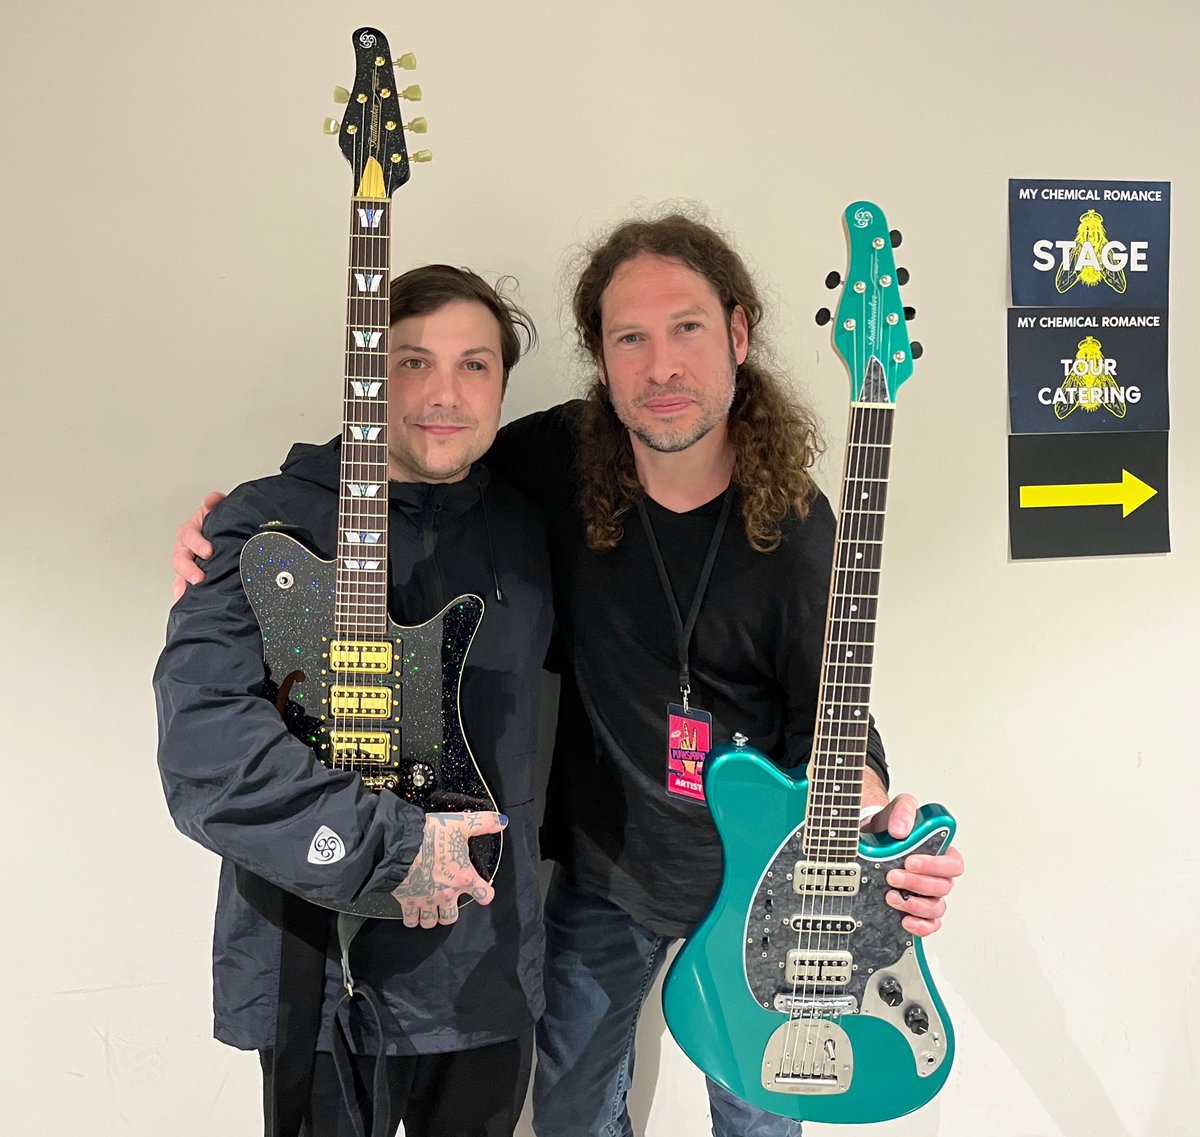 Thank you so much for loving OOPEGG guitars!! Have a great Japan tour, Frank Iero and Ray Toro from @MCRofficial 🇯🇵

#PUNKSPRING2023 #oopegg #MYCHEMICALROMANCE #Japan #guitargear #guitarist #neobizarre #パンクスプリング2023 #パンスプ #マイケミカルロマンス #ギタリスト #感謝